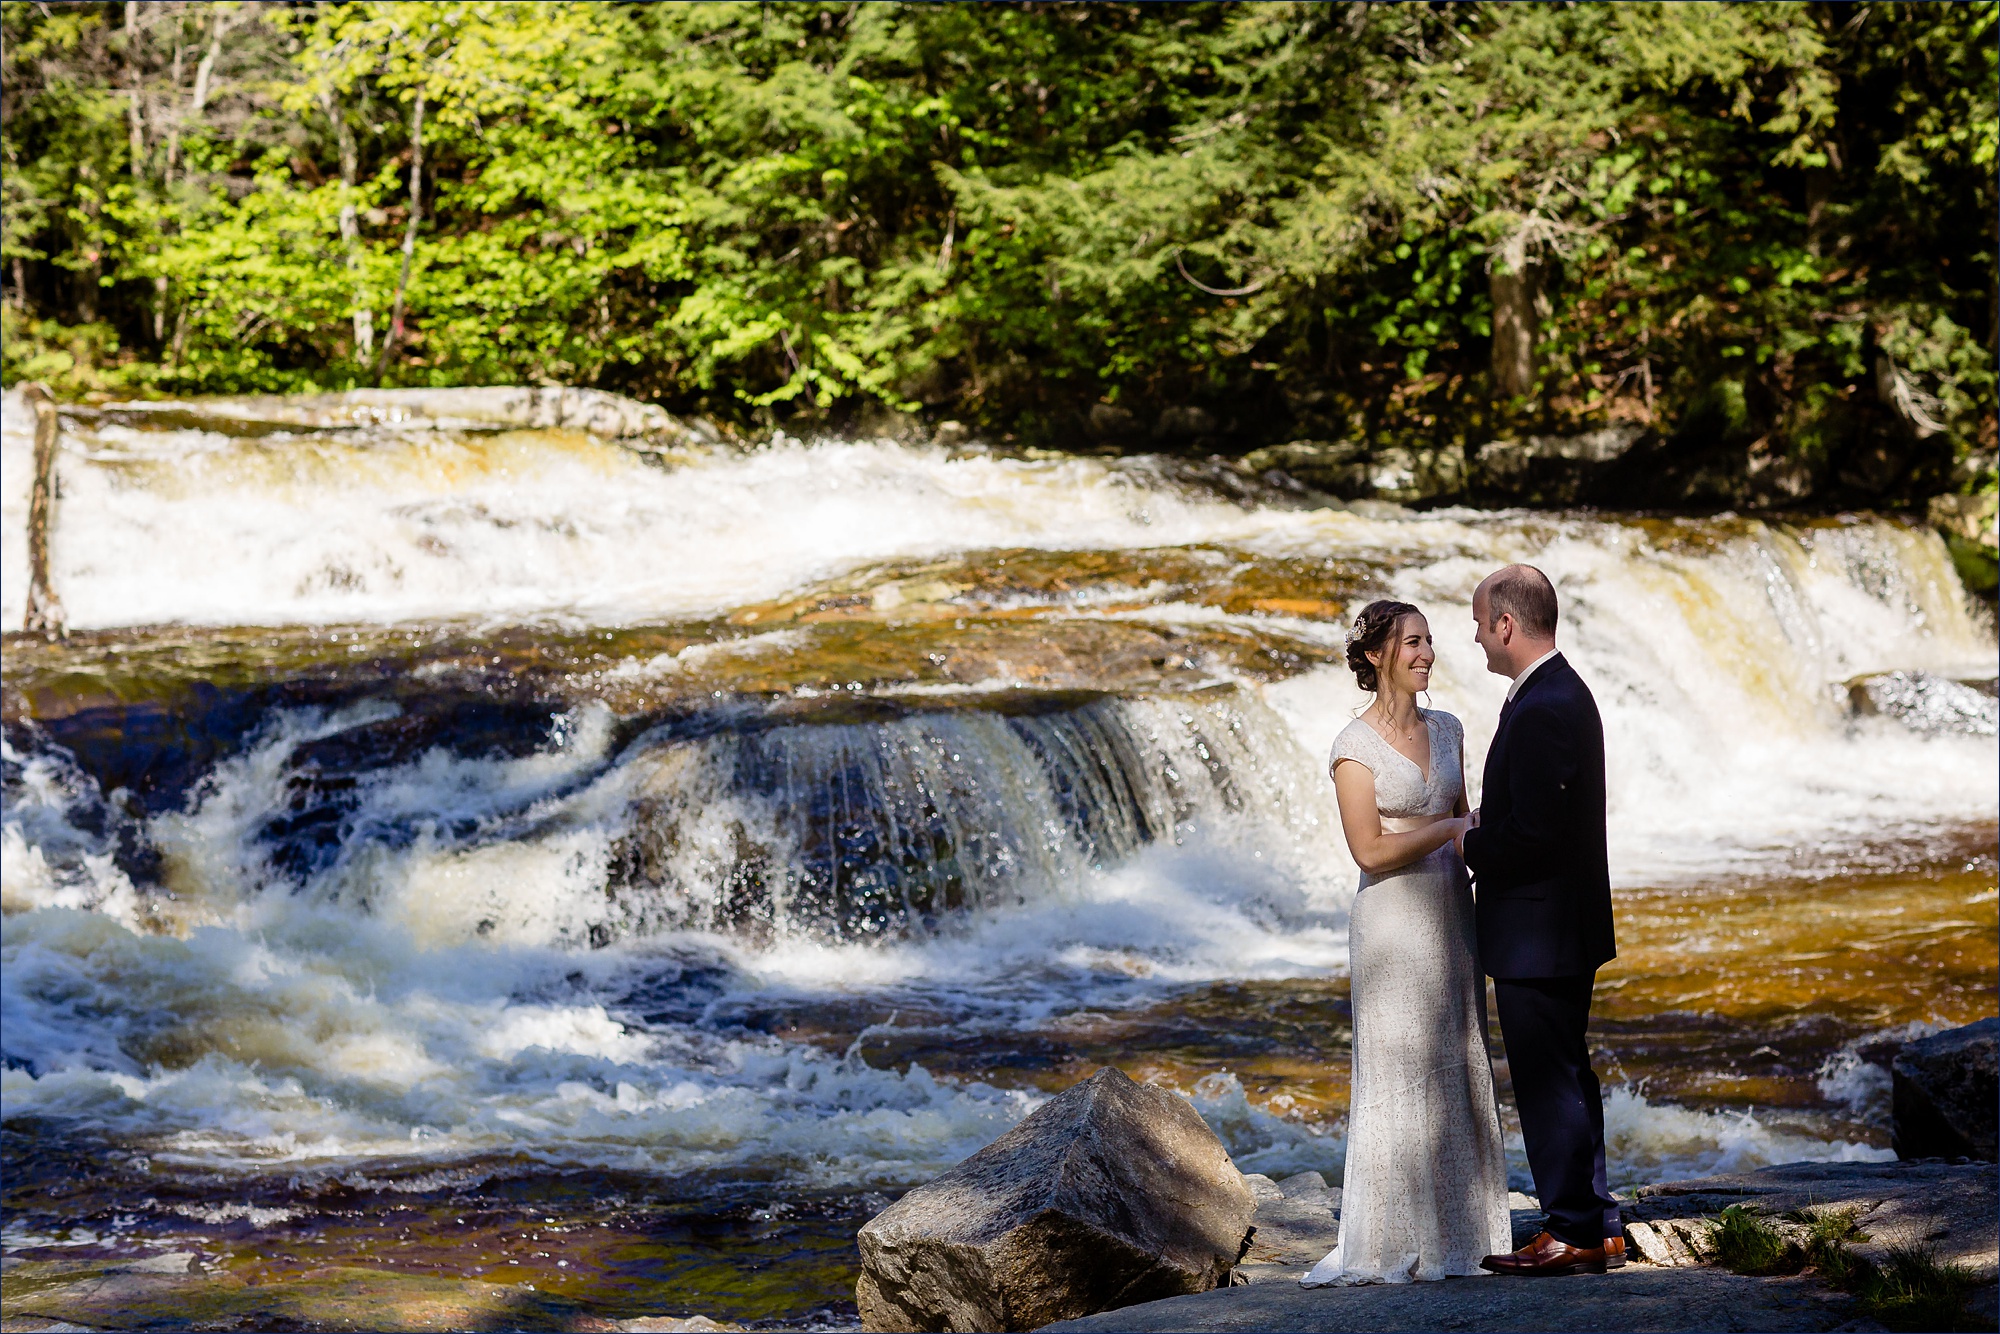 The newlyweds laugh as they stand on the rocks of Jackson Falls New Hampshire after eloping